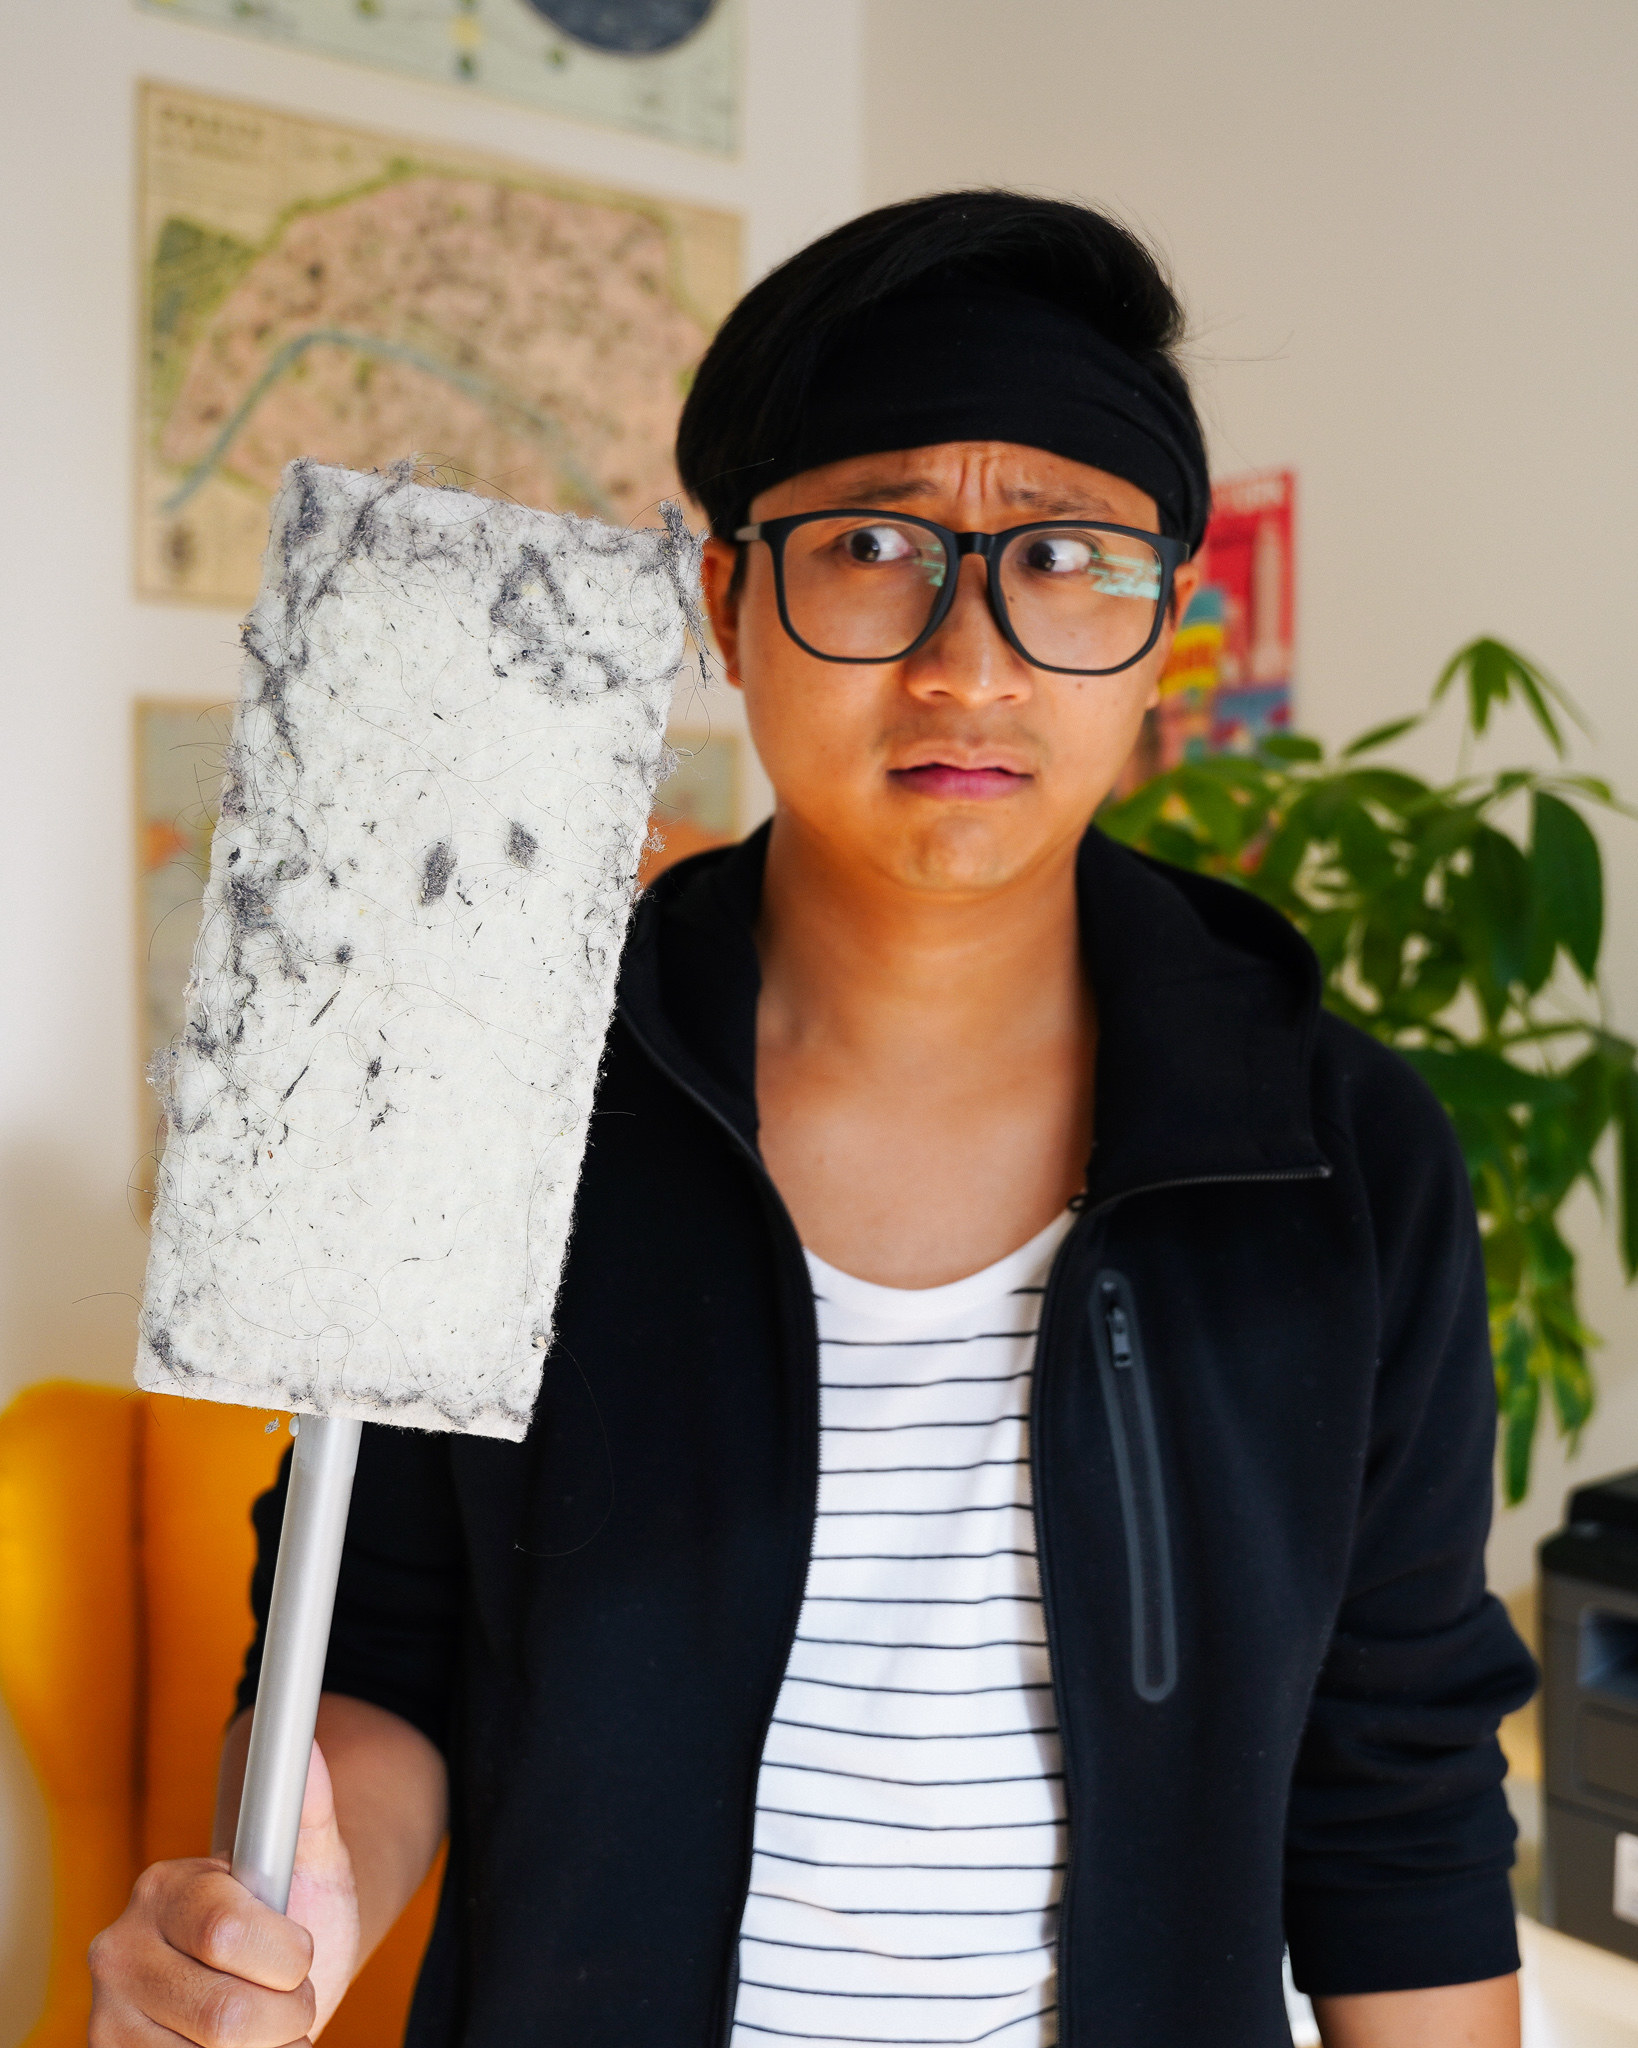 A man holding a dirty Swiffer with a disgusted look on his face.